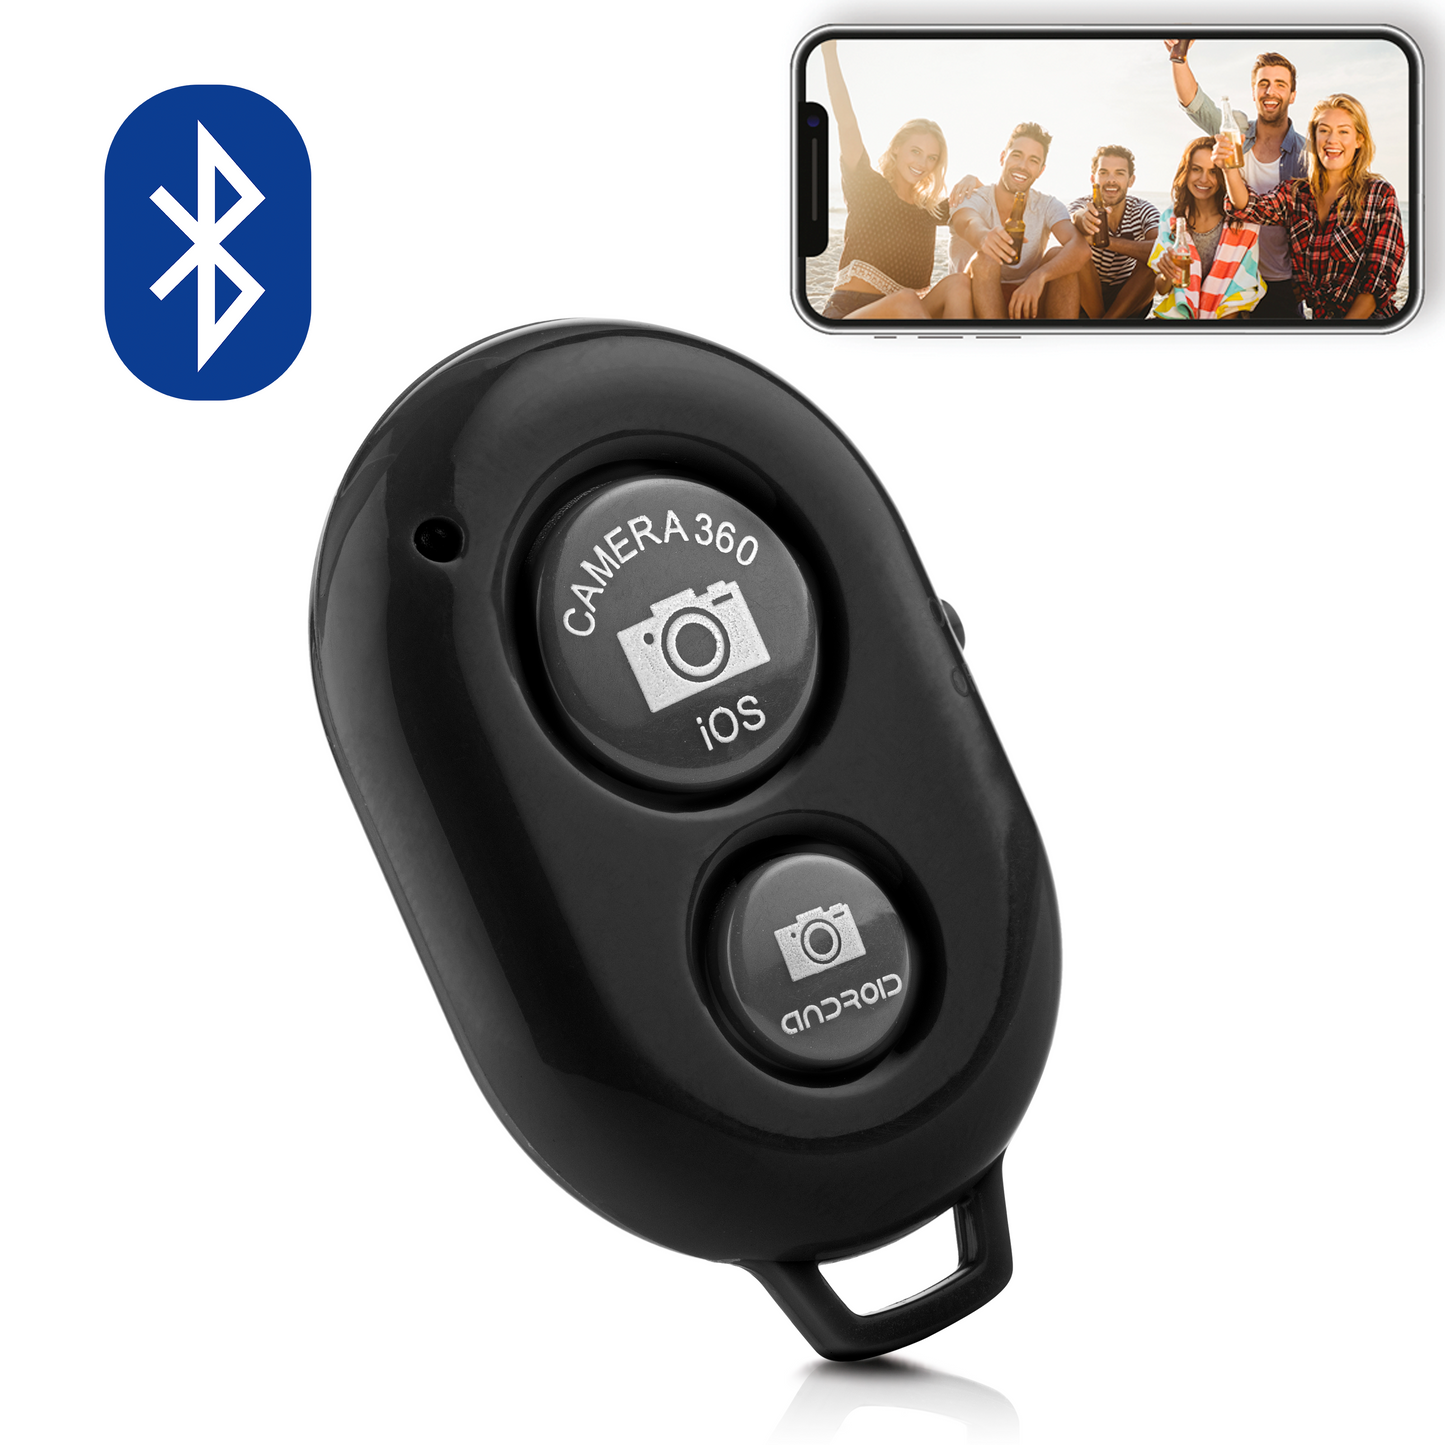 Bluetooth remote shutter for smartphone camera - various colours